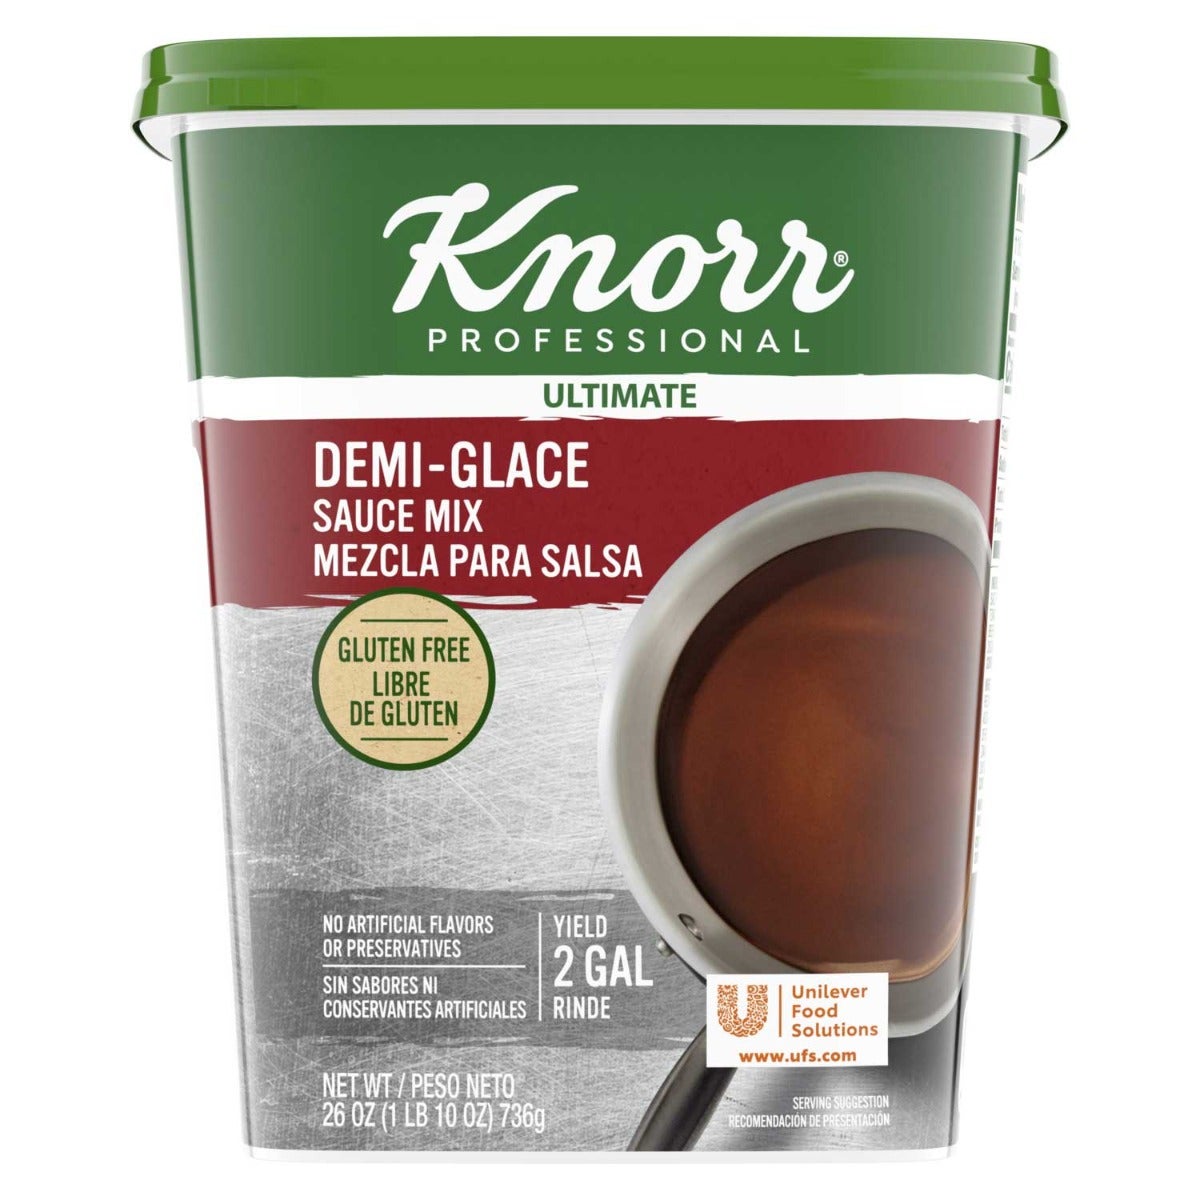 Knorr Professional Ultimate Demi-Glace Sauce Mix Gluten Free, 26 oz